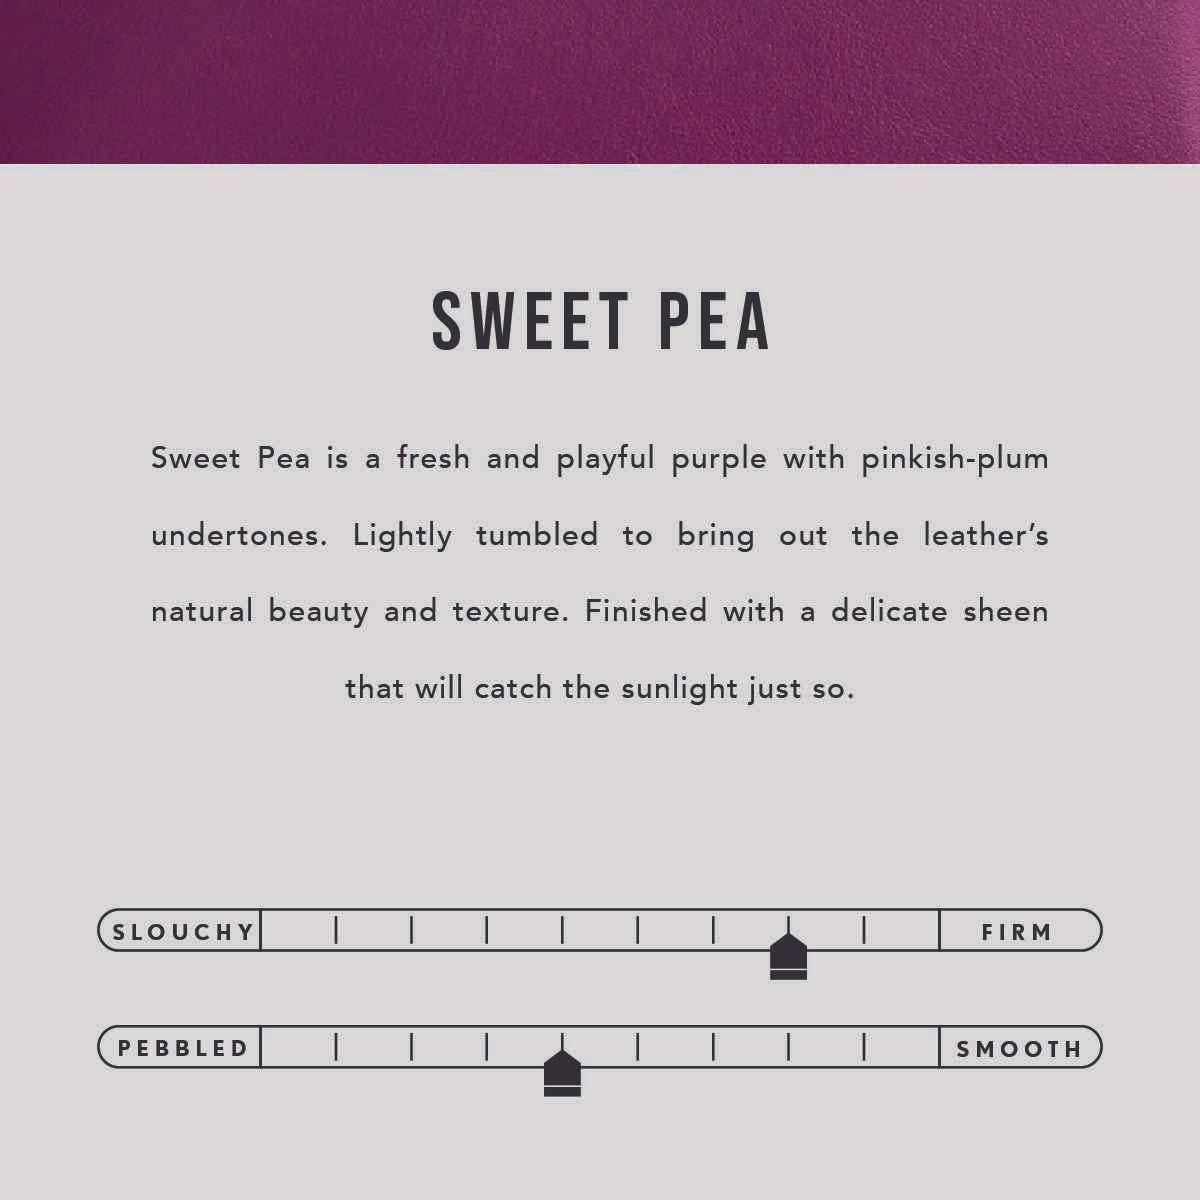 Sweet Pea*Large | infographic